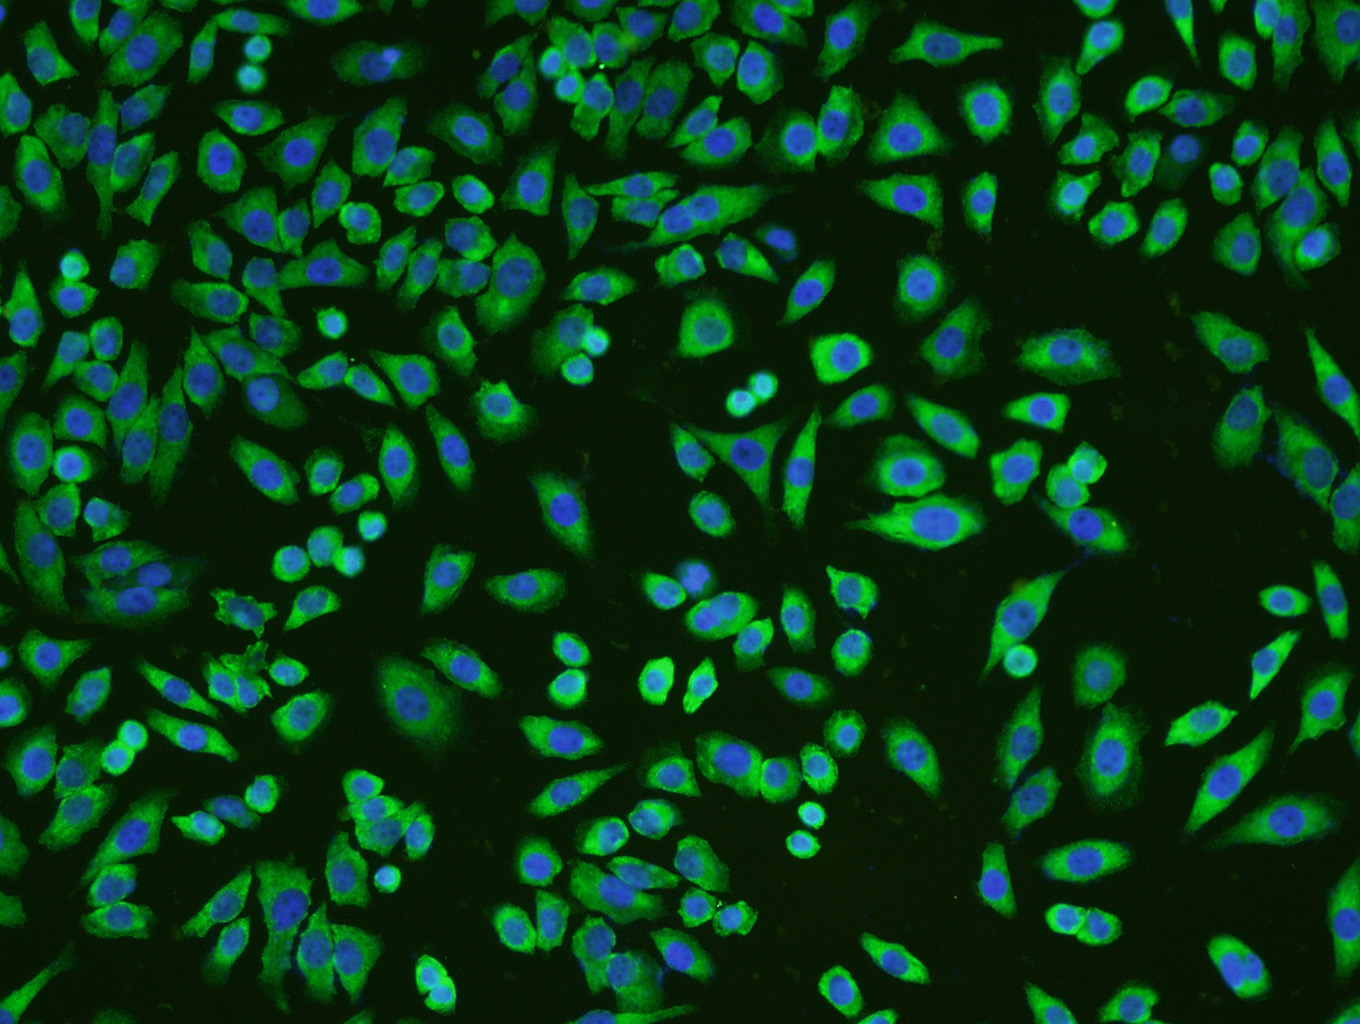 MCF-7 cells were stained with KLF2 Polyclonal Antibody, Unconjugated (bs-2772R) at 1:200 in PBS and incubated for two hours at 37\u00b0C followed by Goat Anti-Rabbit IgG (H+L) FITC conjugated secondary antibody. DAPI staining of the nucleus was done and then detected.